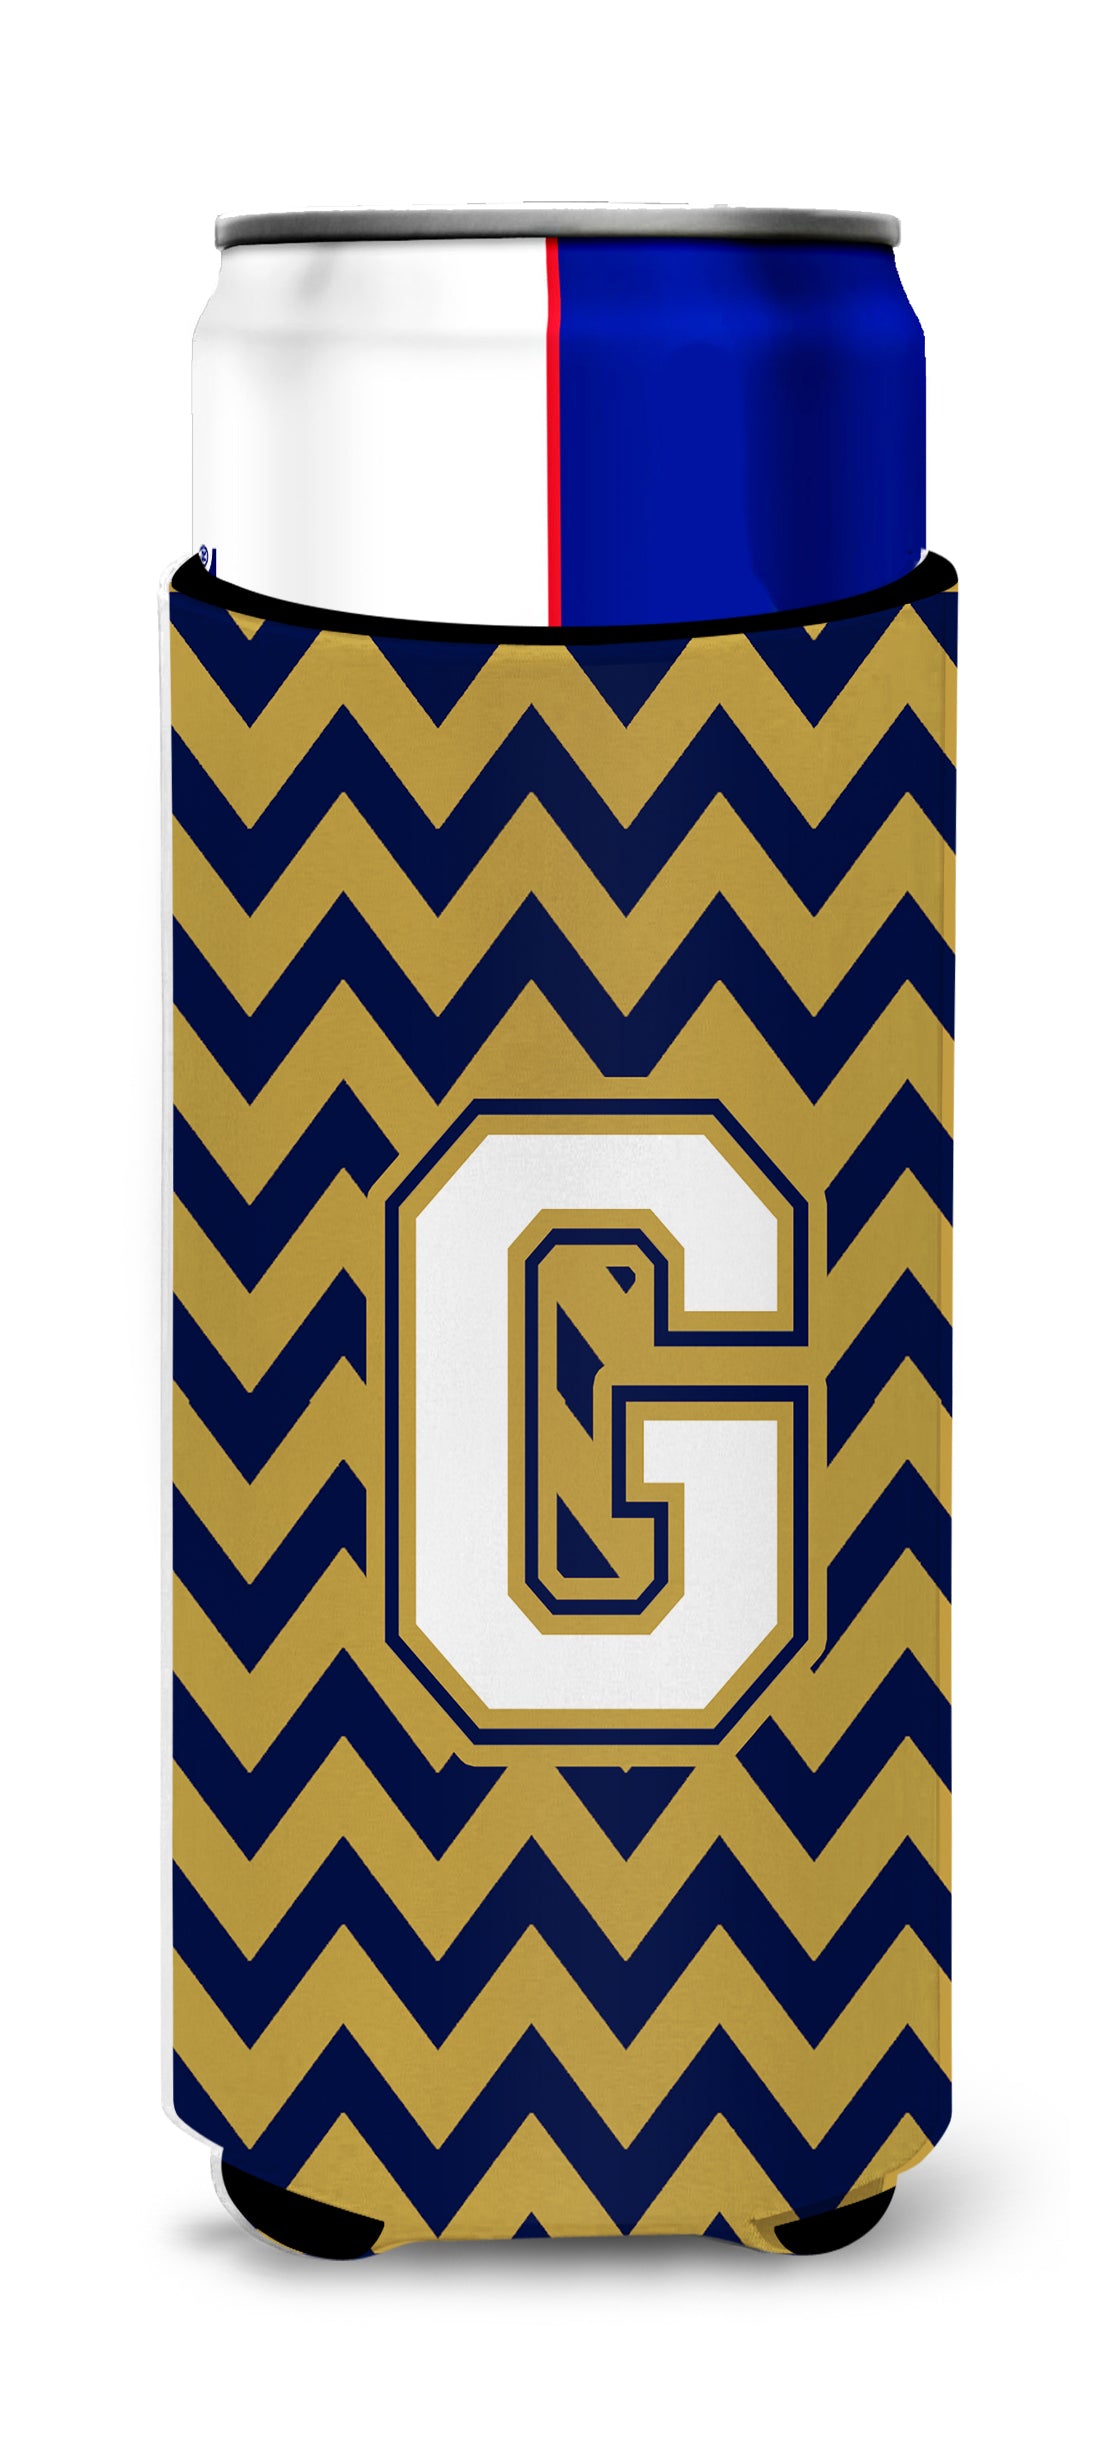 Letter G Chevron Navy Blue and Gold Ultra Beverage Insulators for slim cans CJ1057-GMUK.